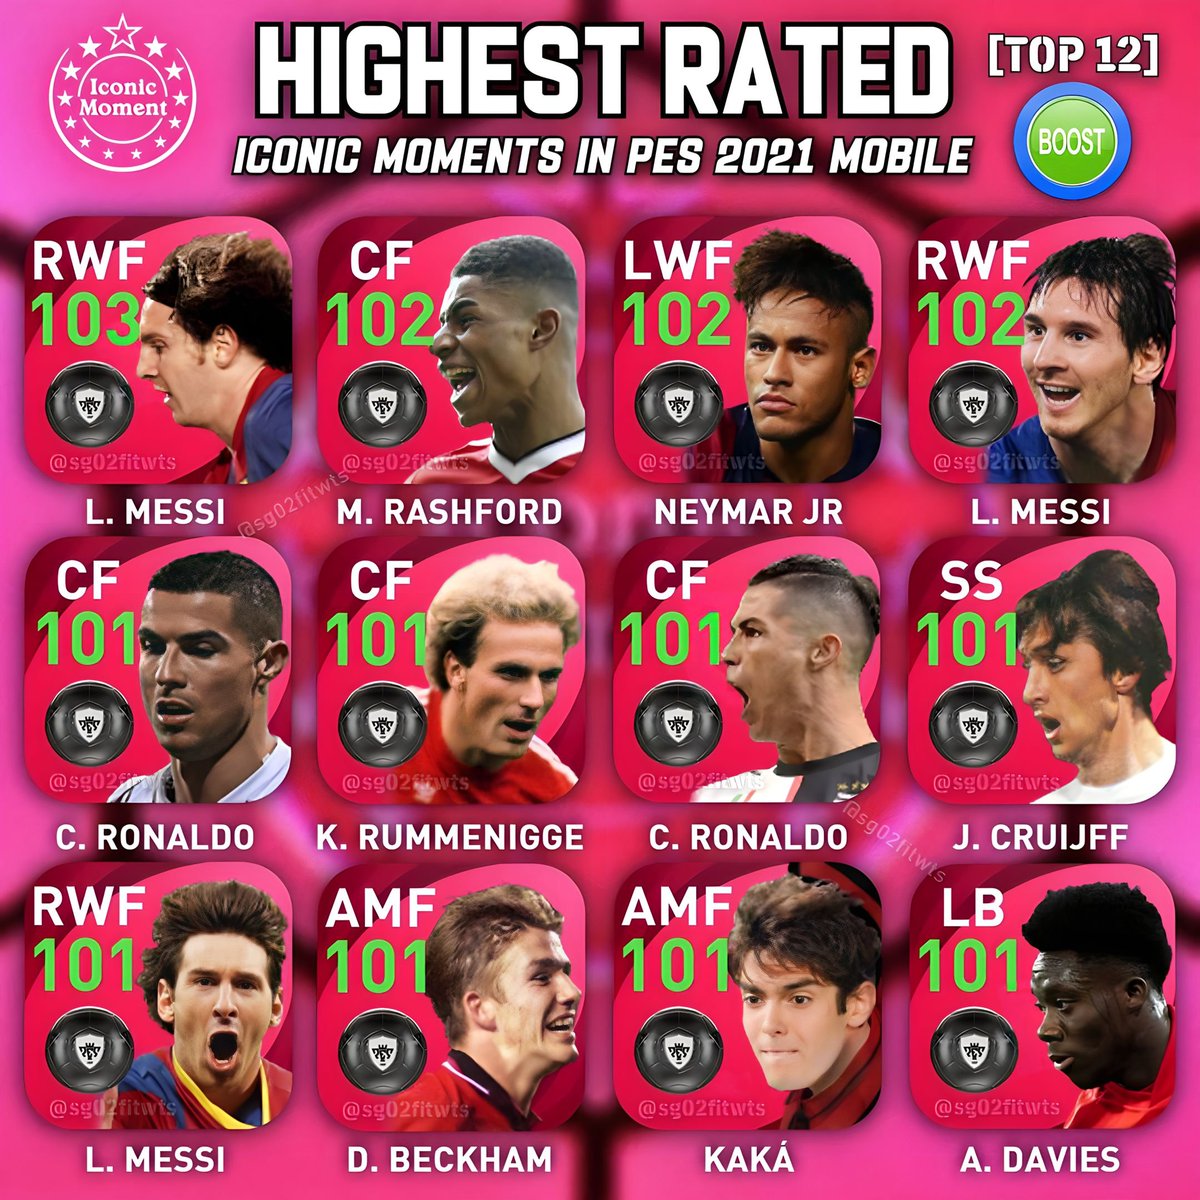 [THROWBACK] HIGHEST RATED - ICONIC MOMENTS IN #PES2021 !

#eFootballPES2021 | #PES2021MOBILE